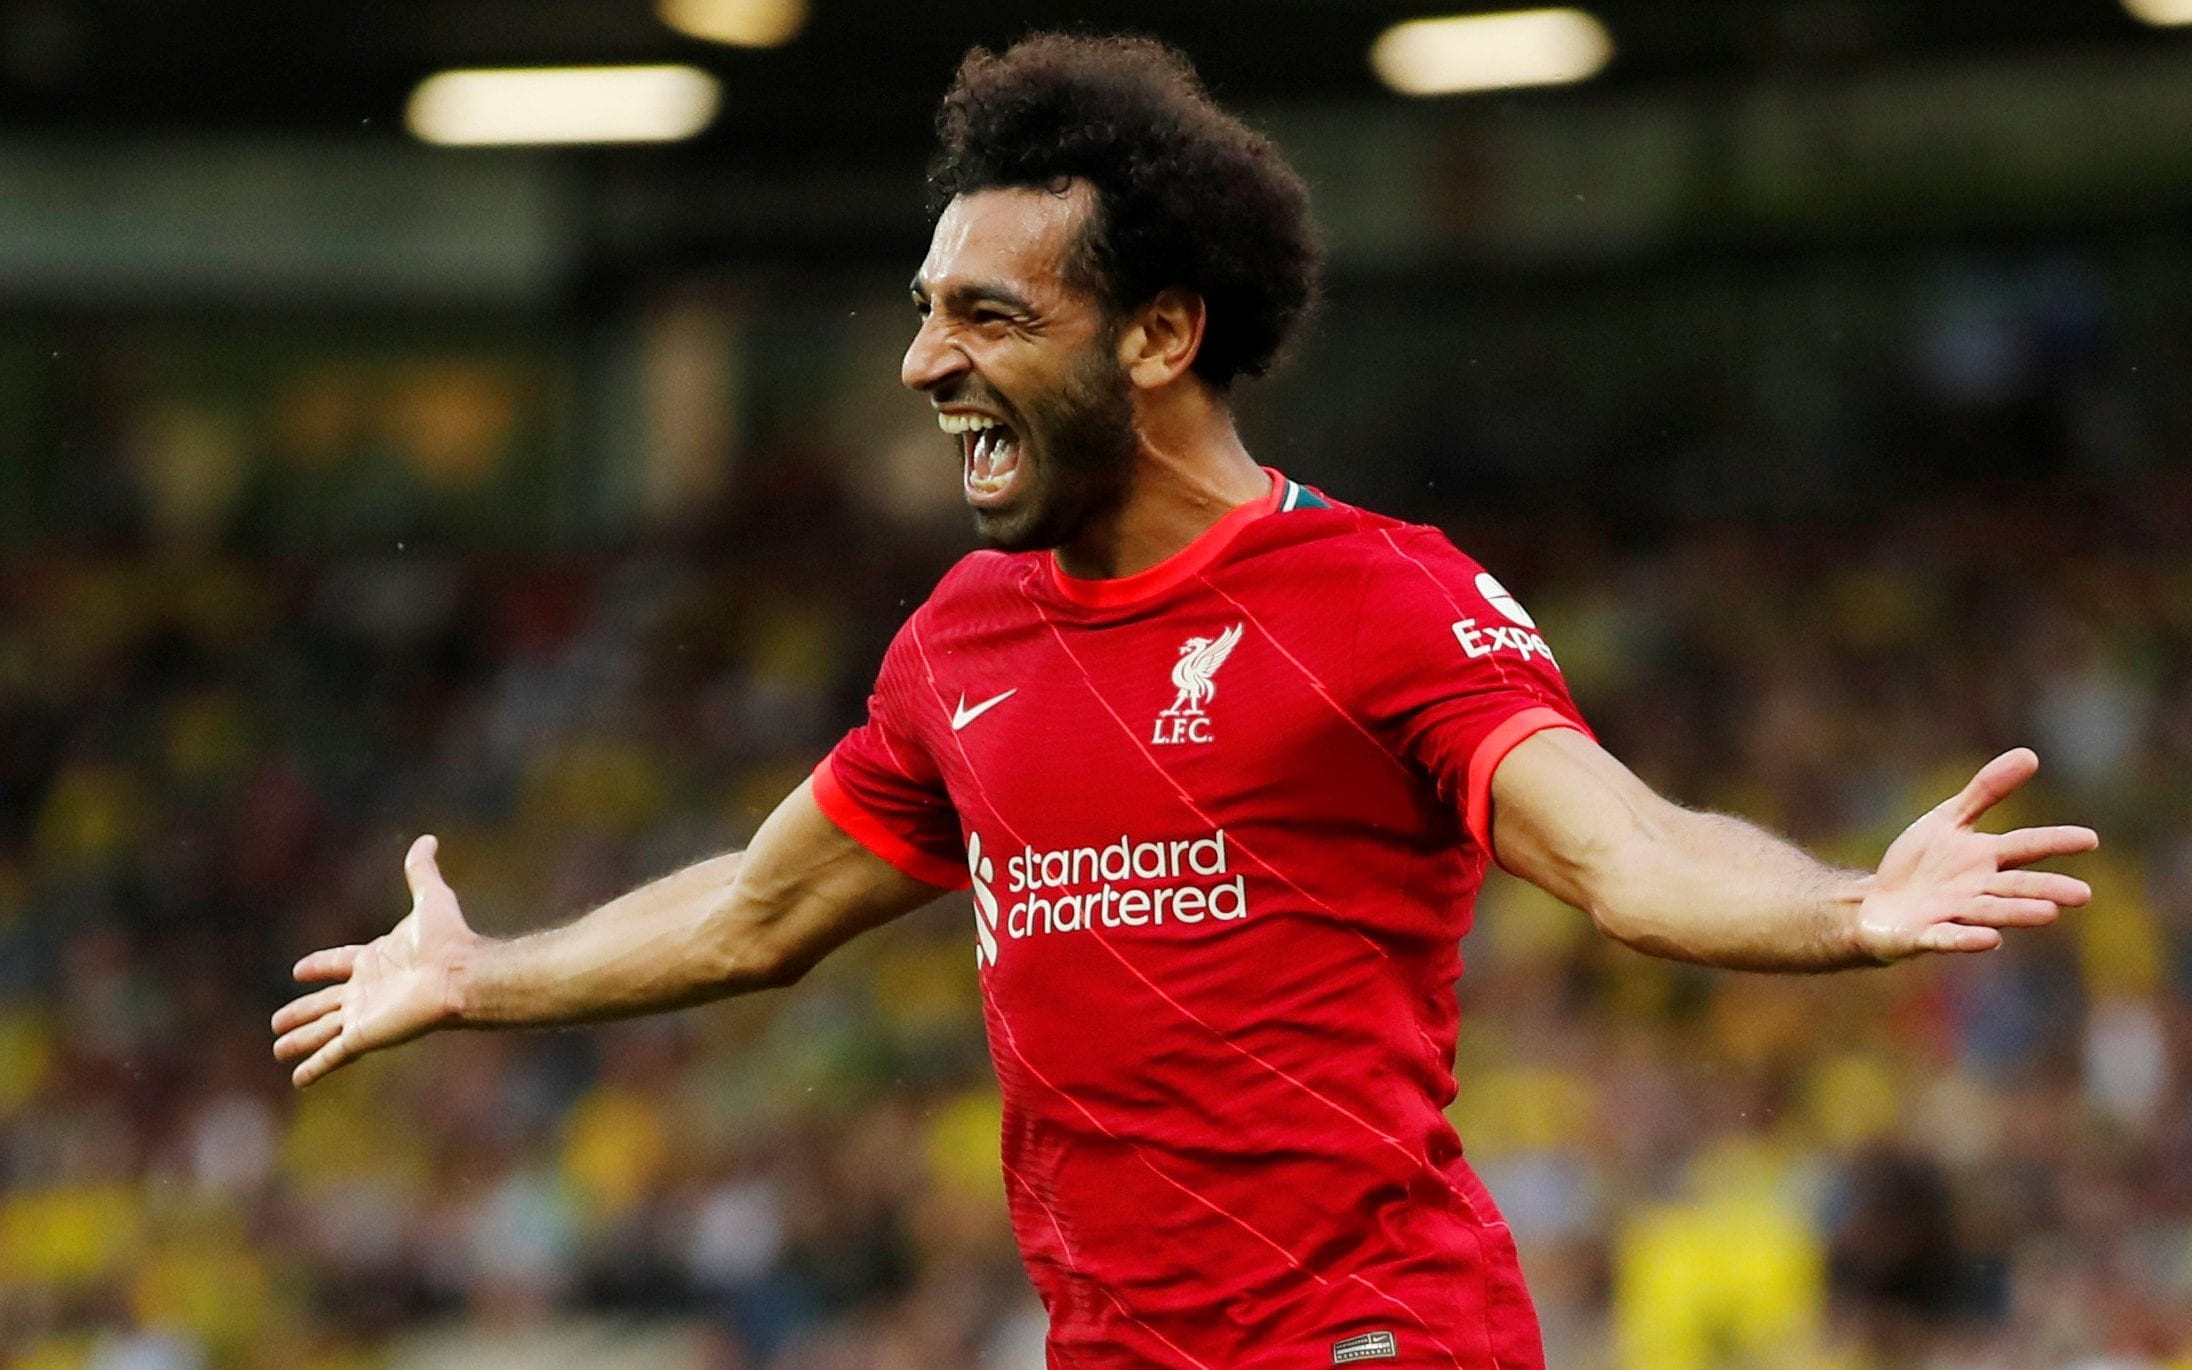 Agent sends warning message to Liverpool as Mo Salah scored in PL opener